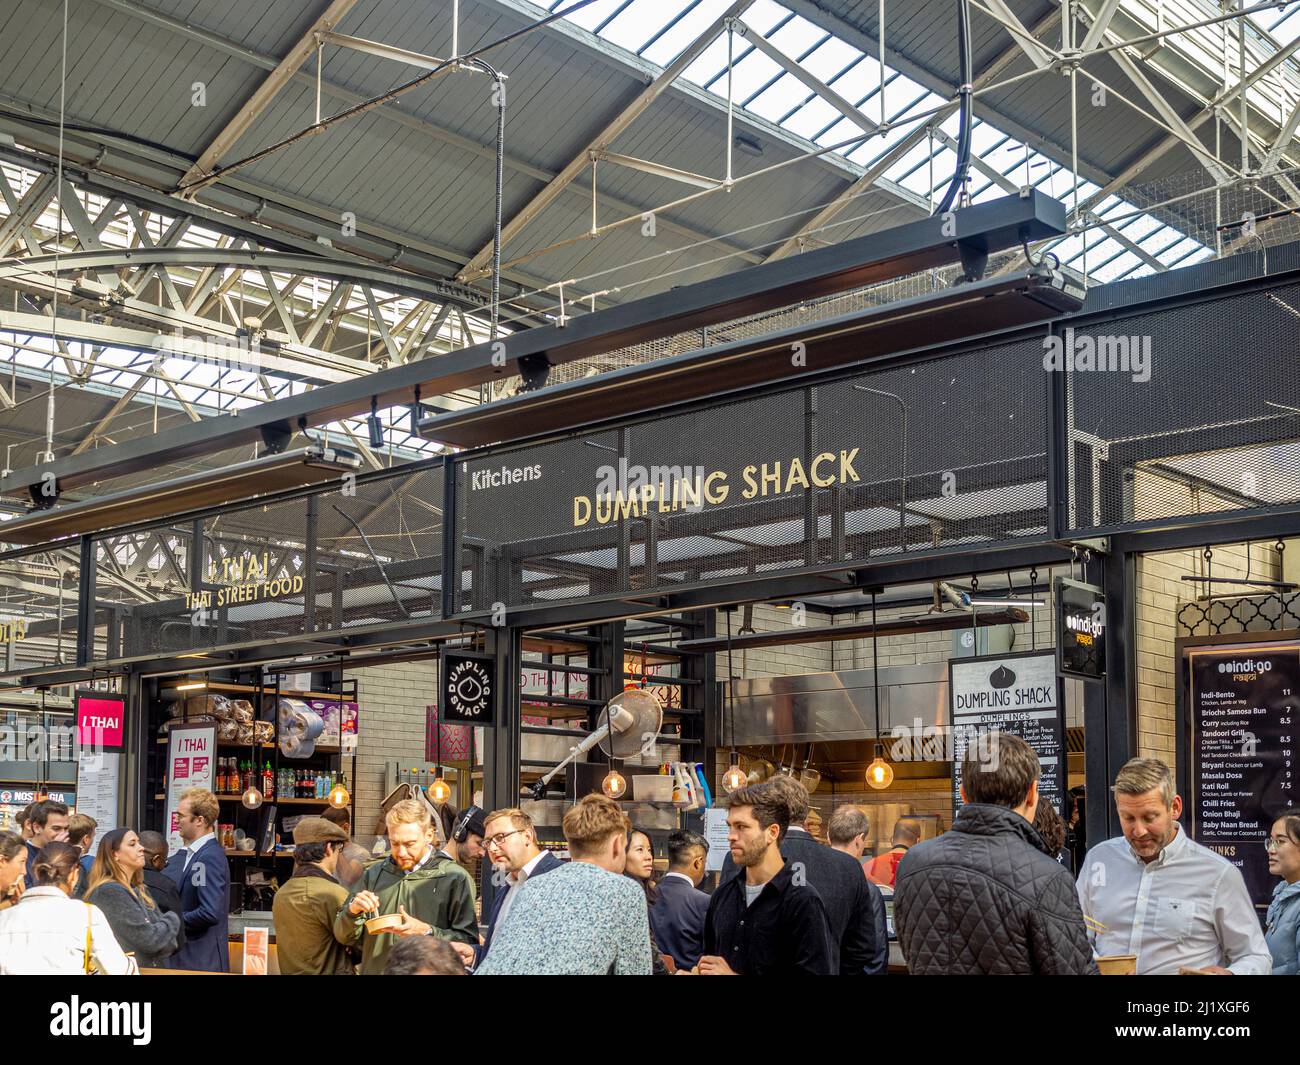 Lunchtime customers at The Dumpling Shack, situated in The Kitchens at Spitalfields Market. London. UK Stock Photo